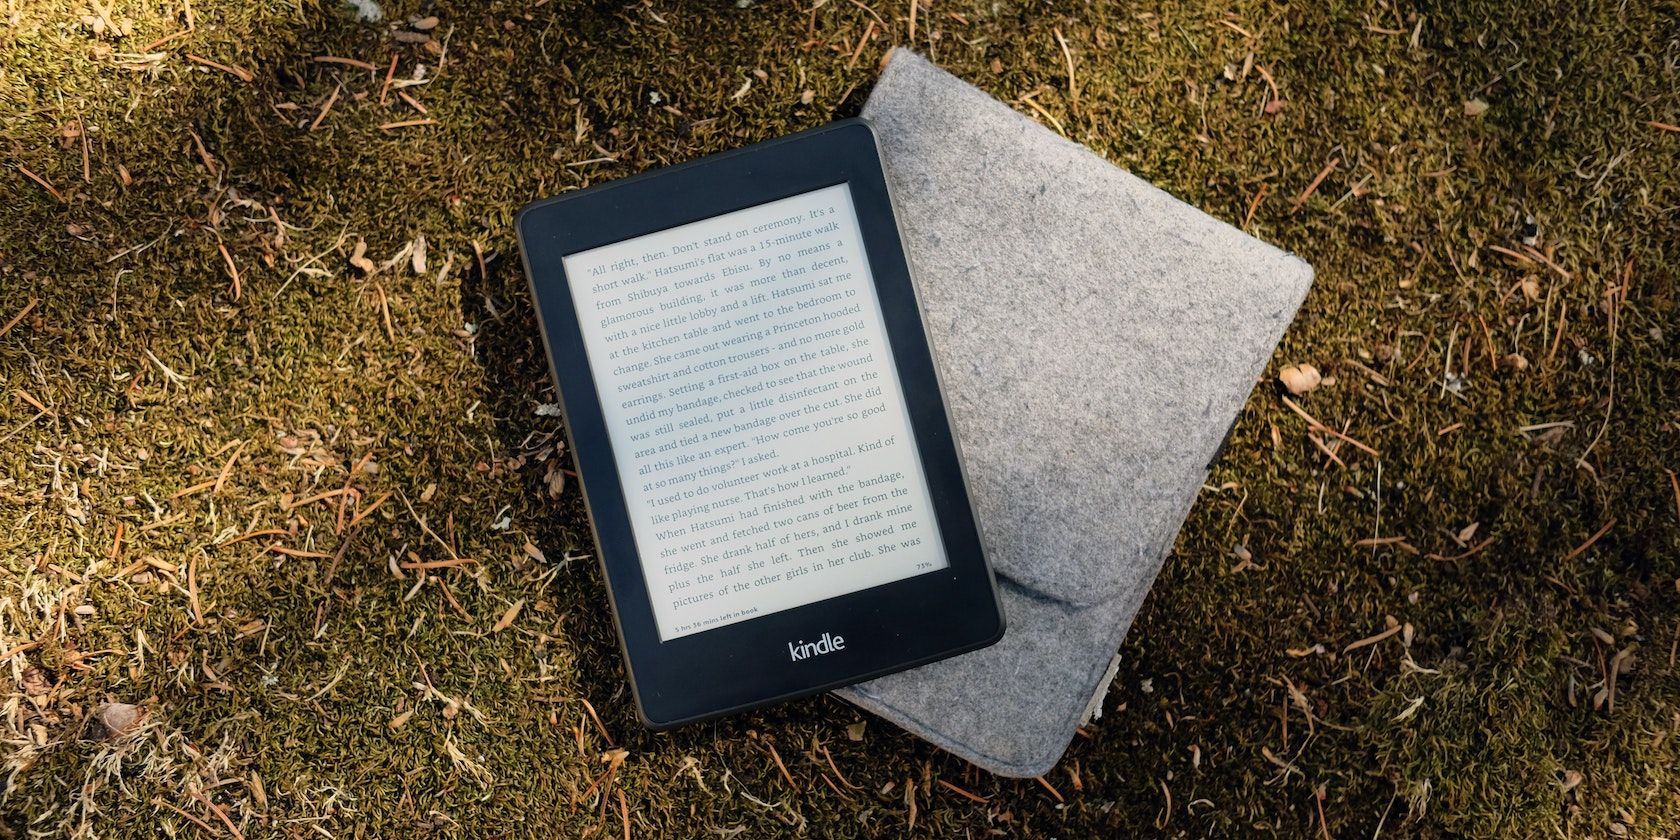 how to use dictionary in kindle fire